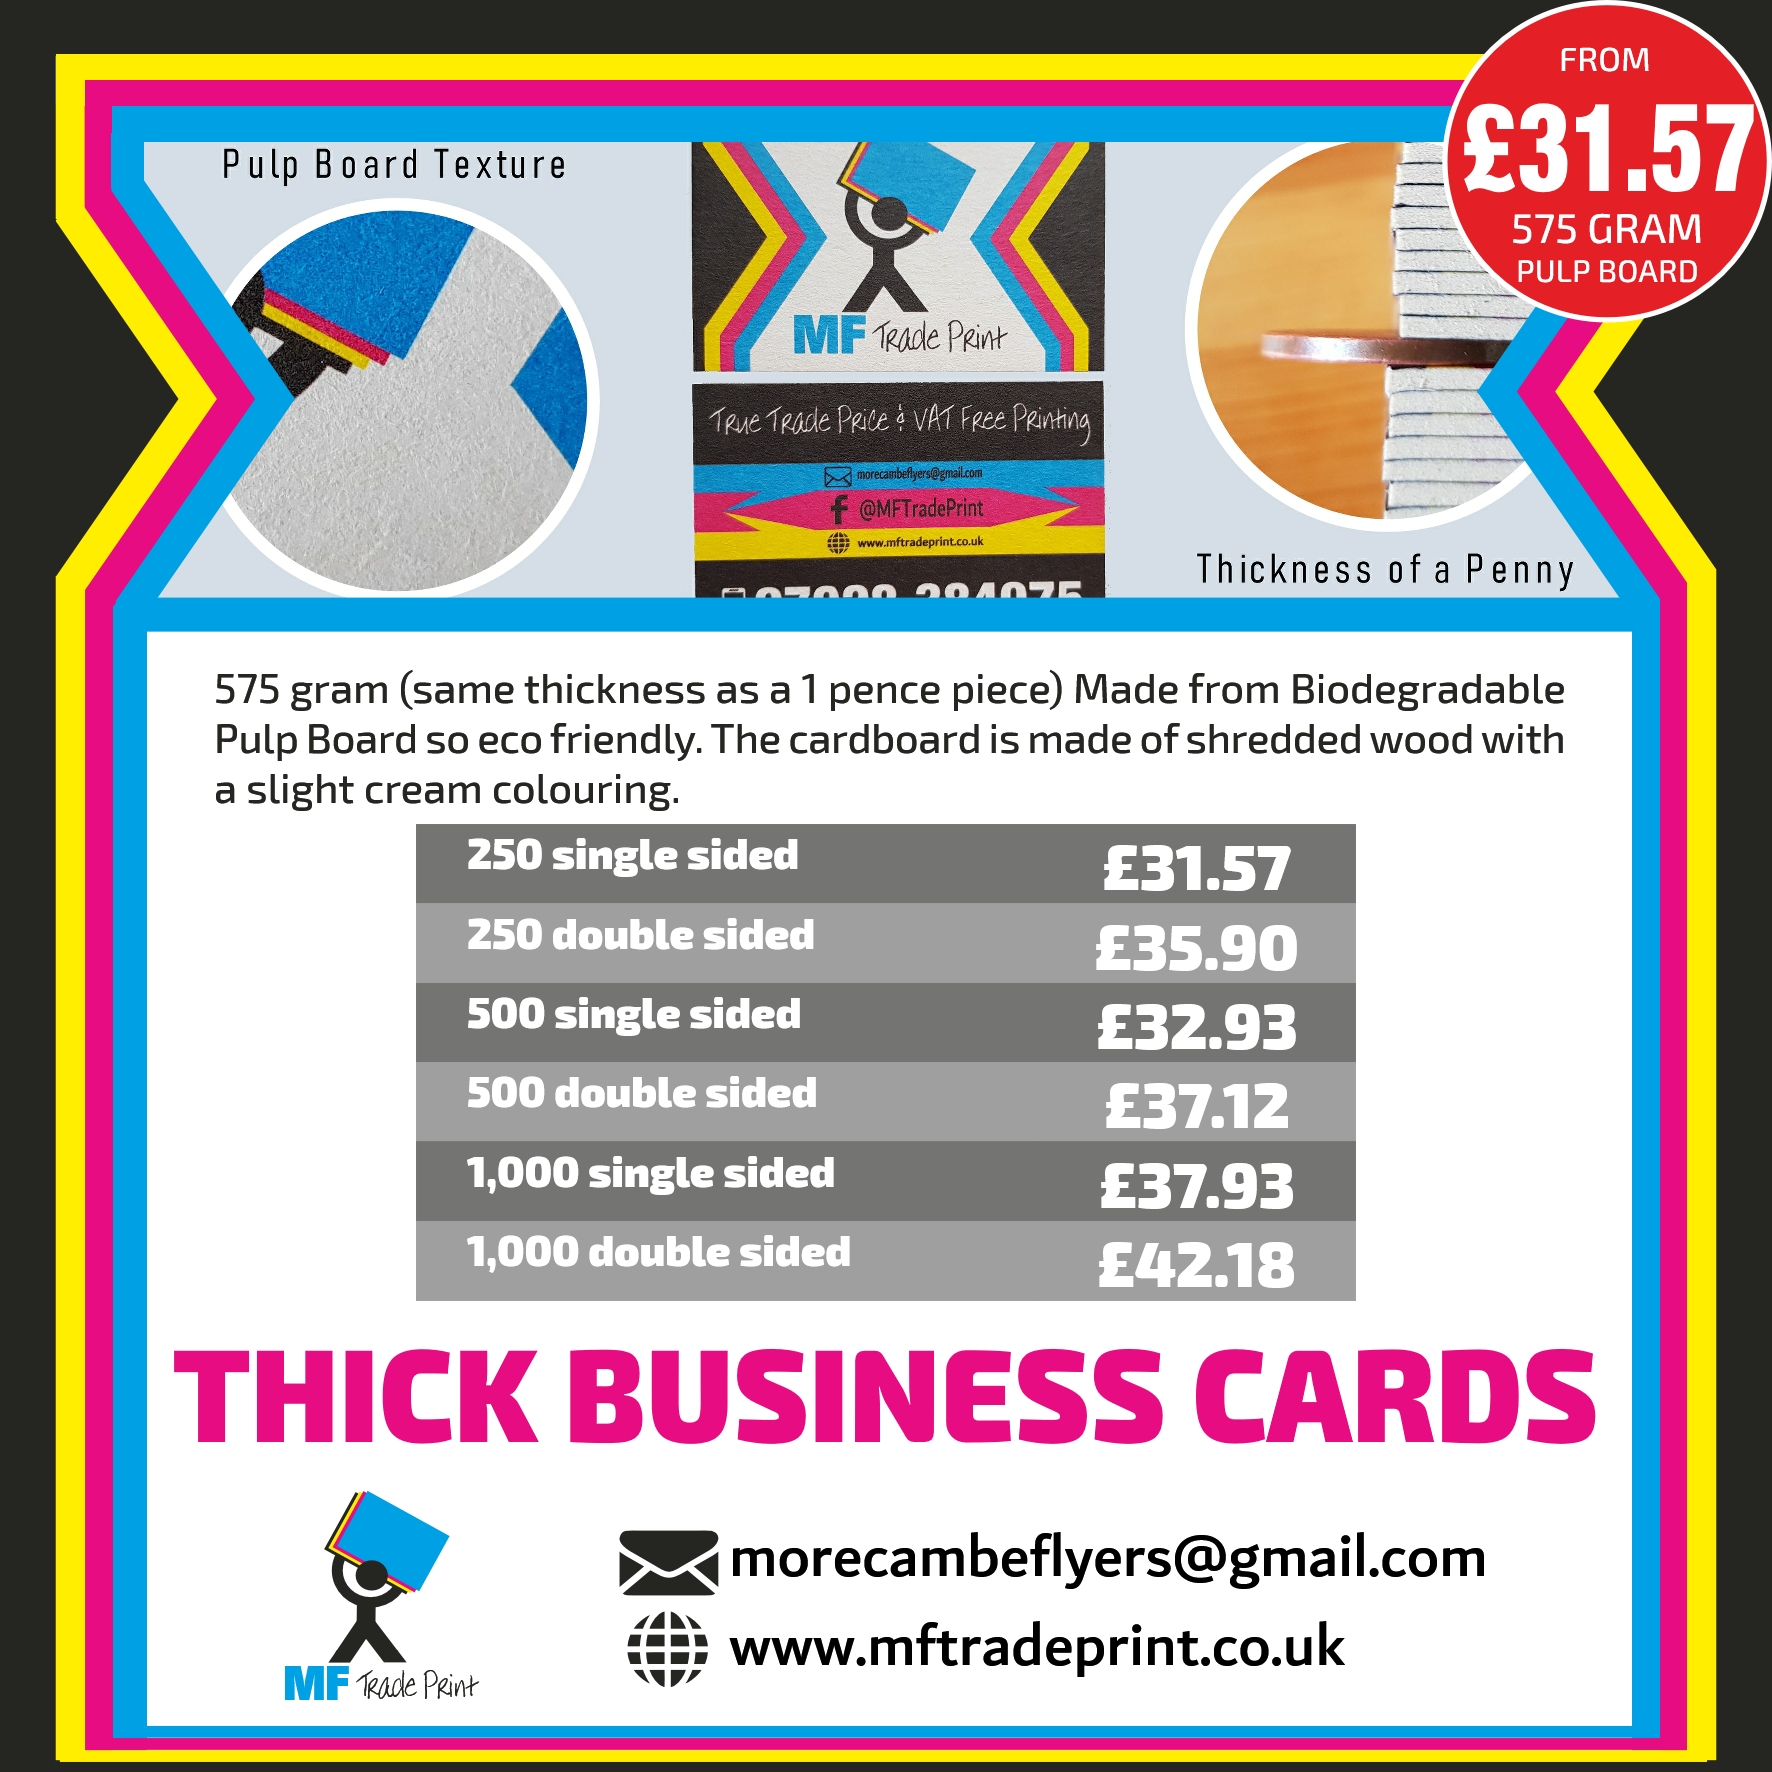 Biodegradable eco friendly thick business cards 575 gram